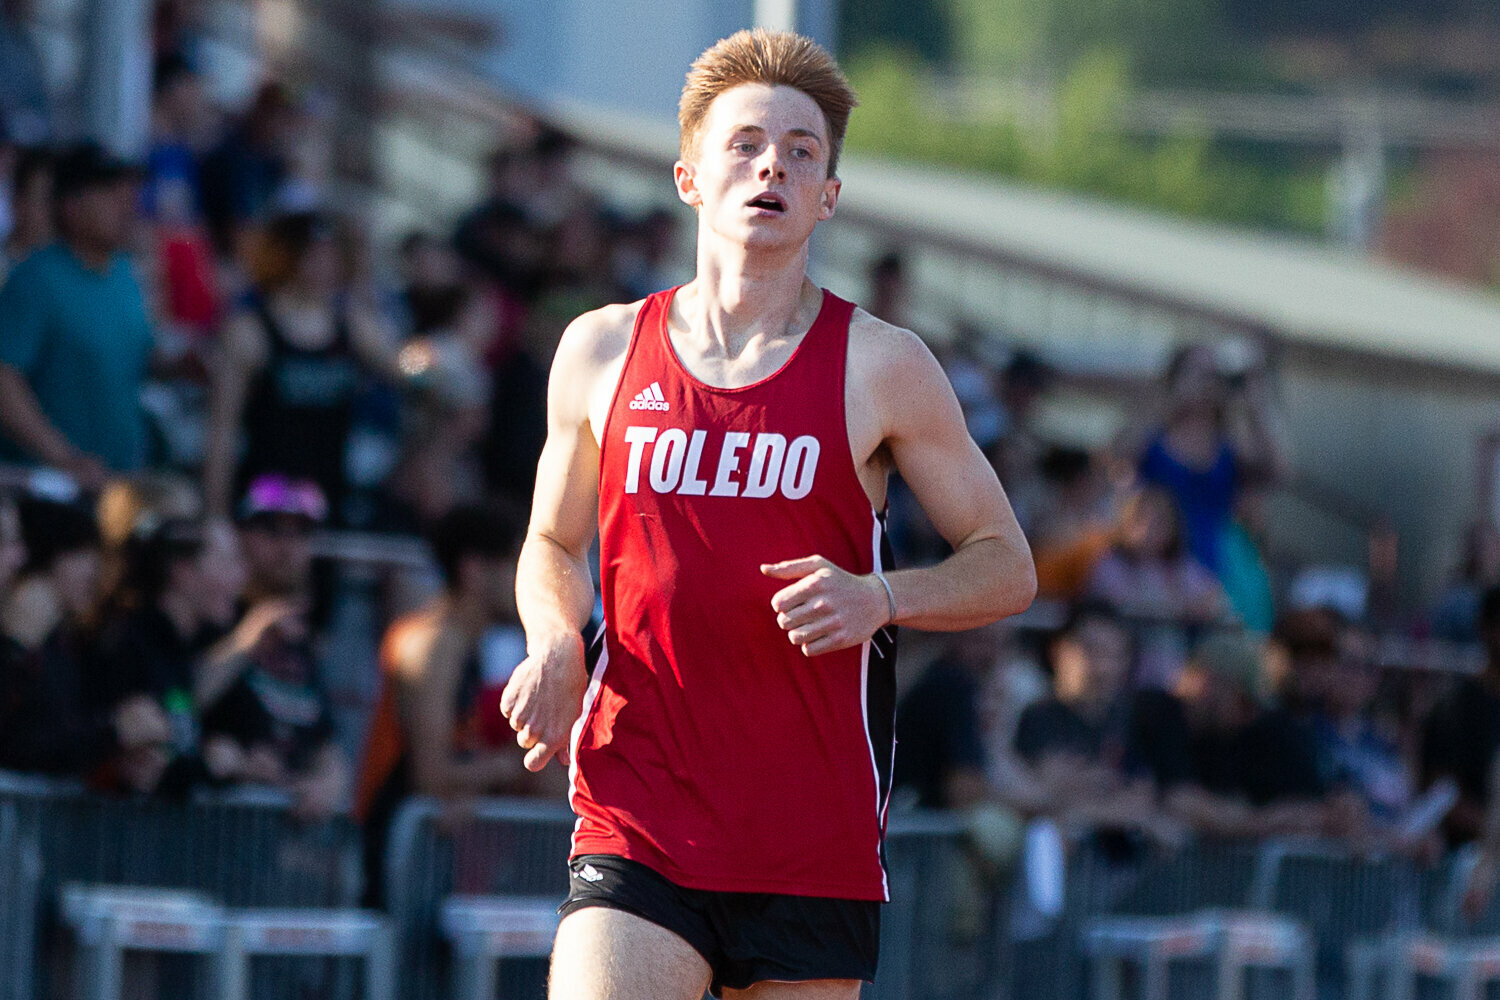 Toledo's Conner Olmstead crosses the finish line in the 400-meter dash May 19 at W.F. West in the 2B District 4 Championships.